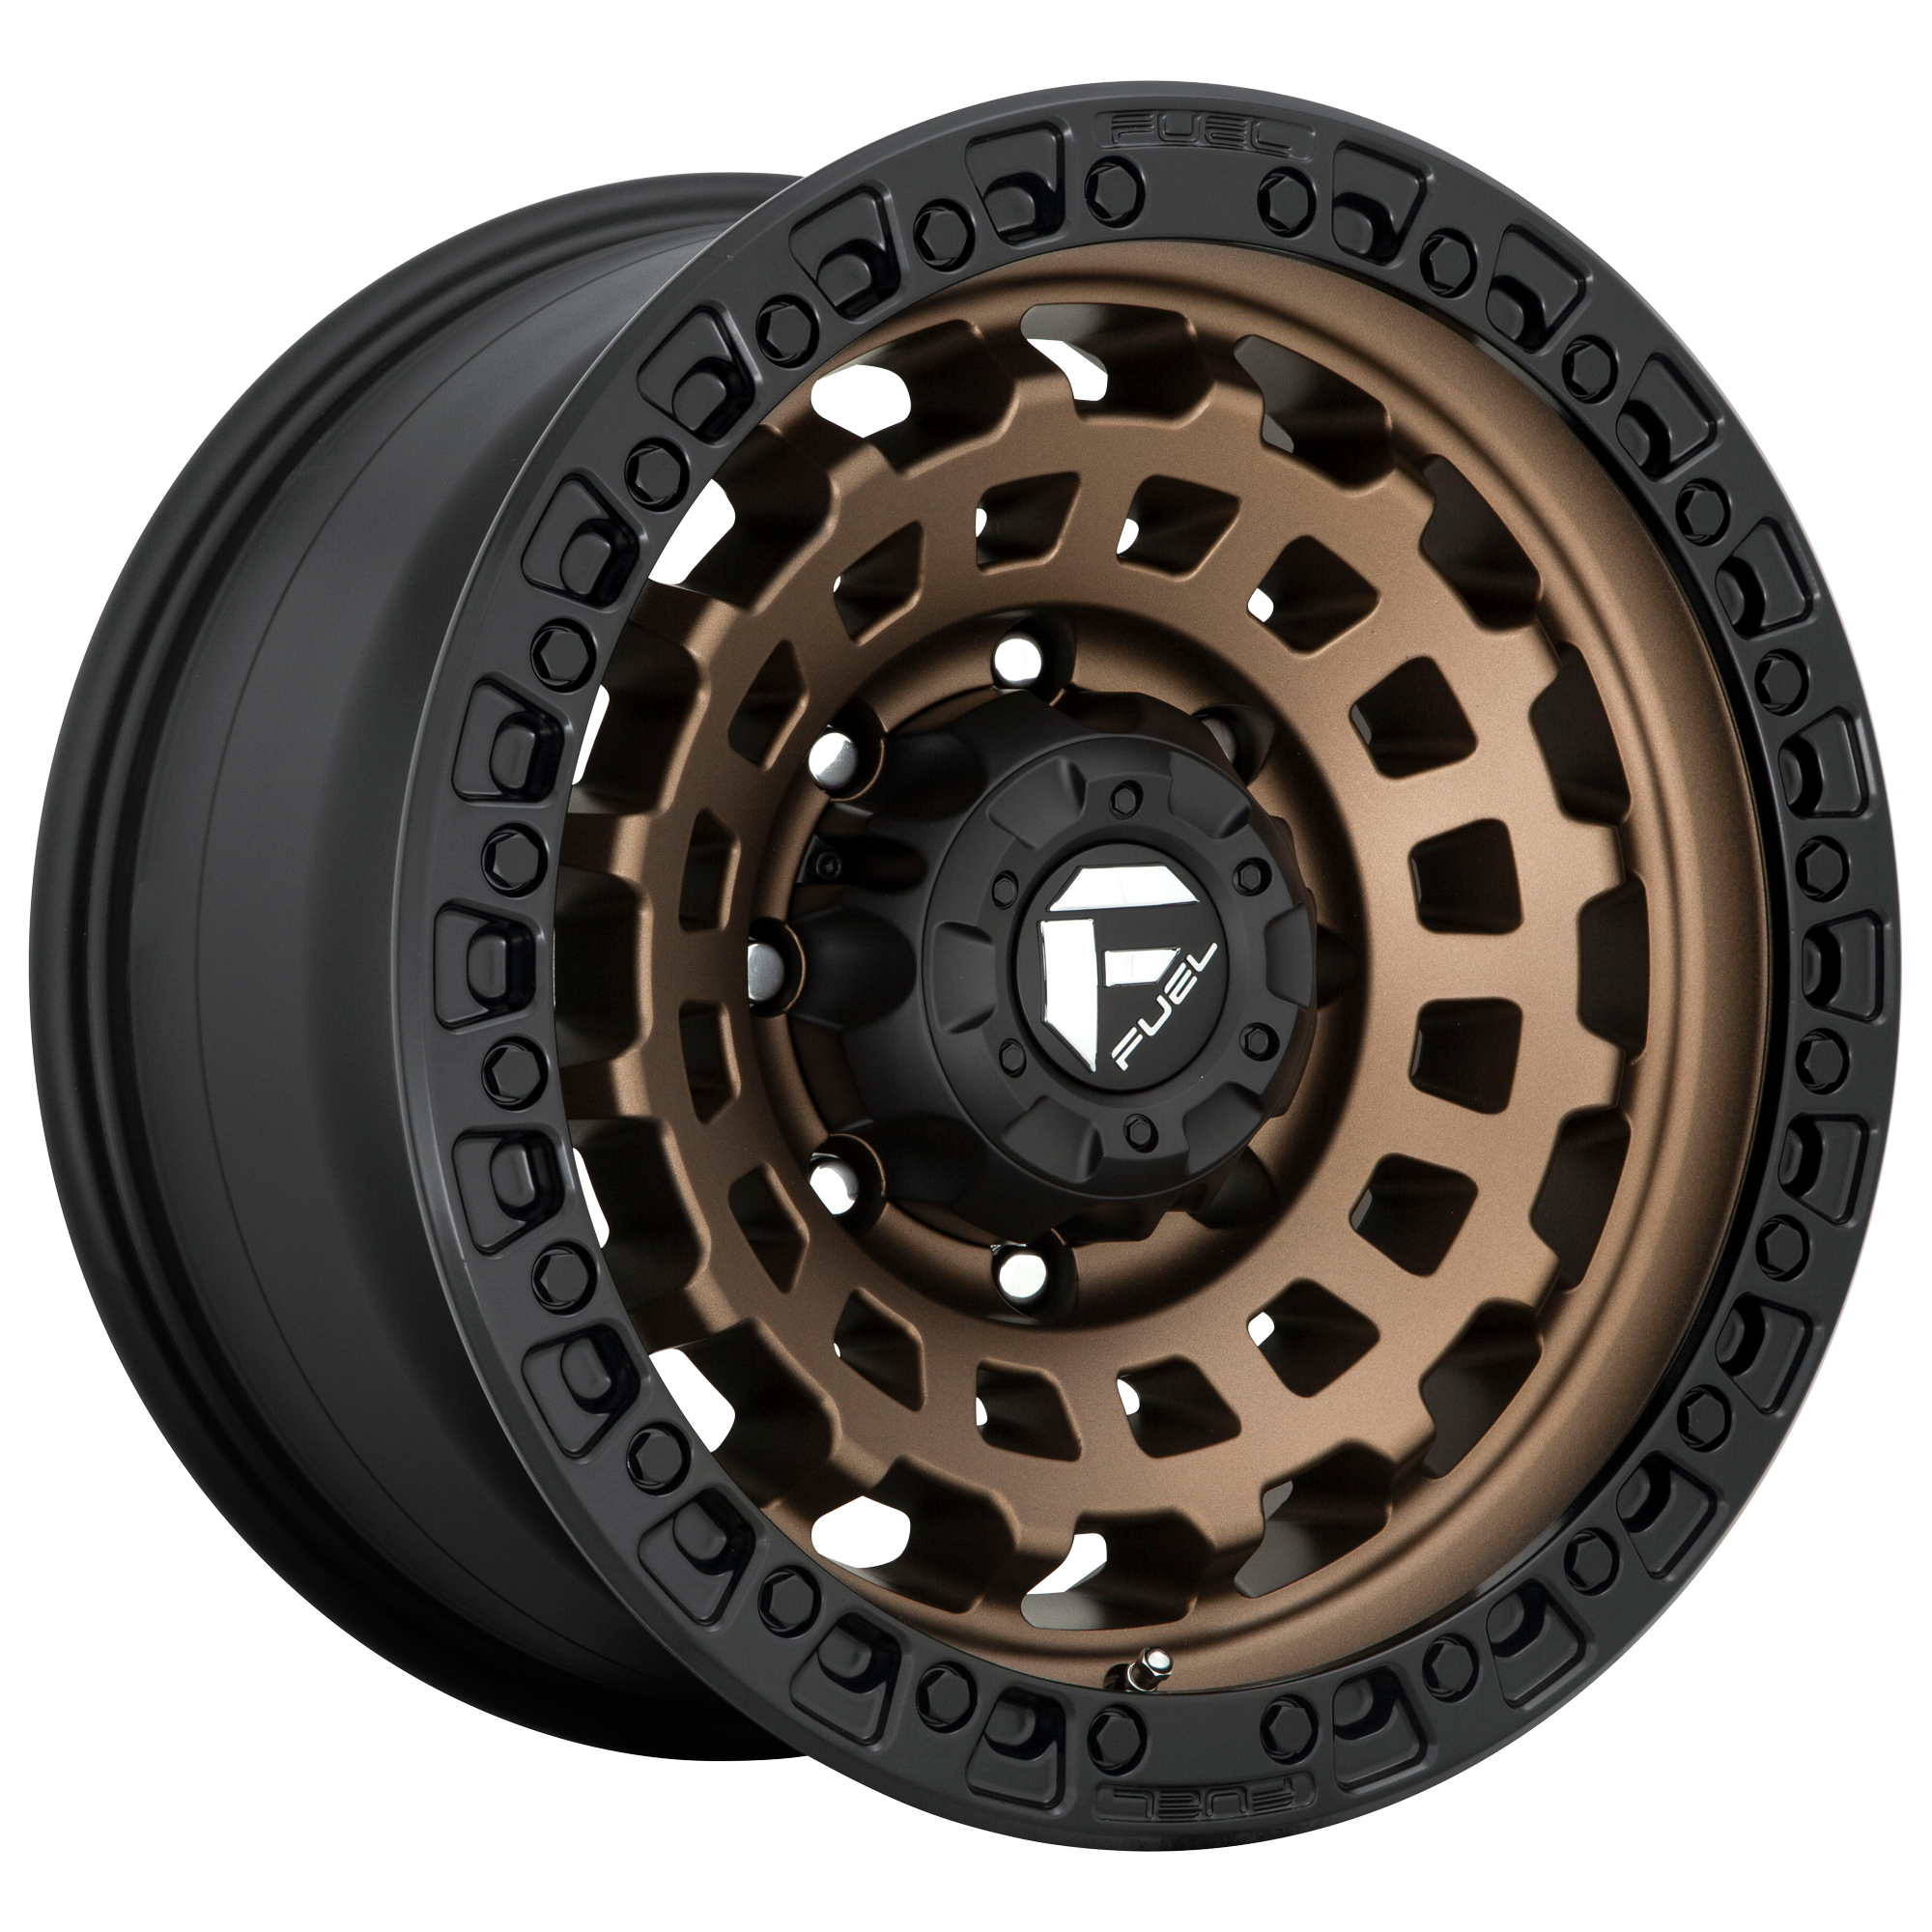 ZEPHYR 17x9 6x135.00 MATTE BRONZE BLACK BEAD RING (-12 mm) - Tires and Engine Performance